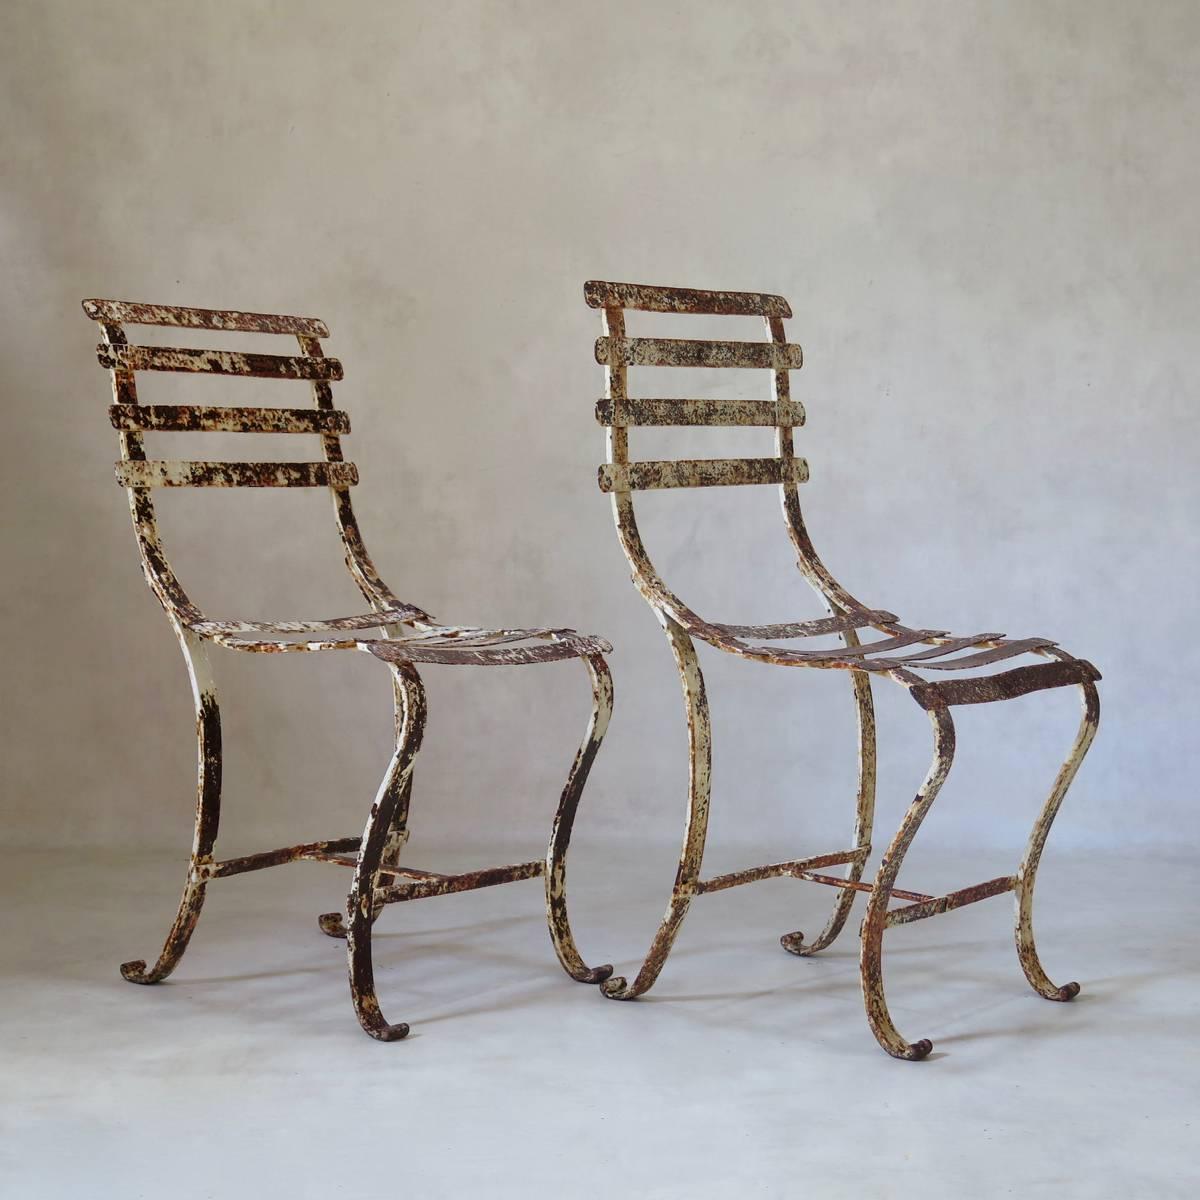 Elegant and unusual pair of wrought iron chairs with a graceful line, and original, distressed paint.